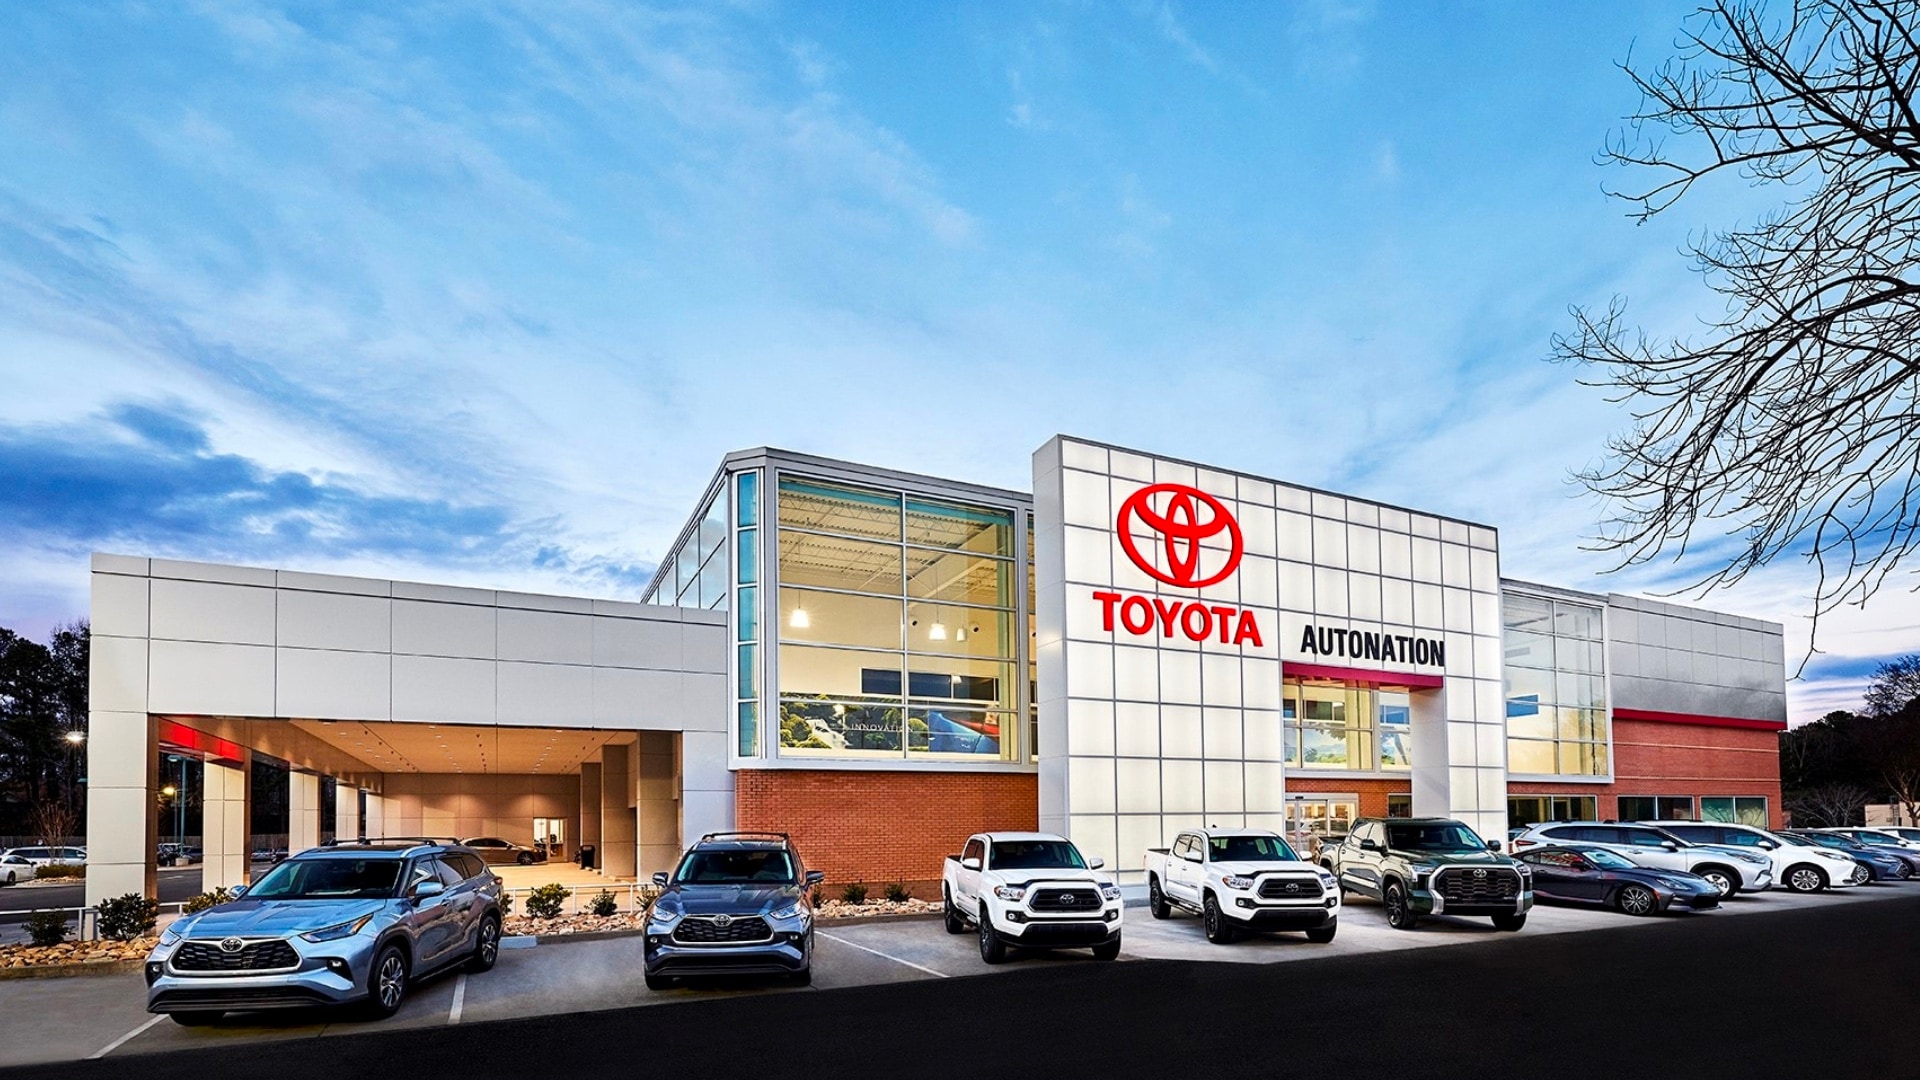 Exterior view of AutoNation Toyota Mall of Georgia. The building is grey and white and has some large windows. Many vehicles are seen parked lined up the building, which also has some trees nearby.